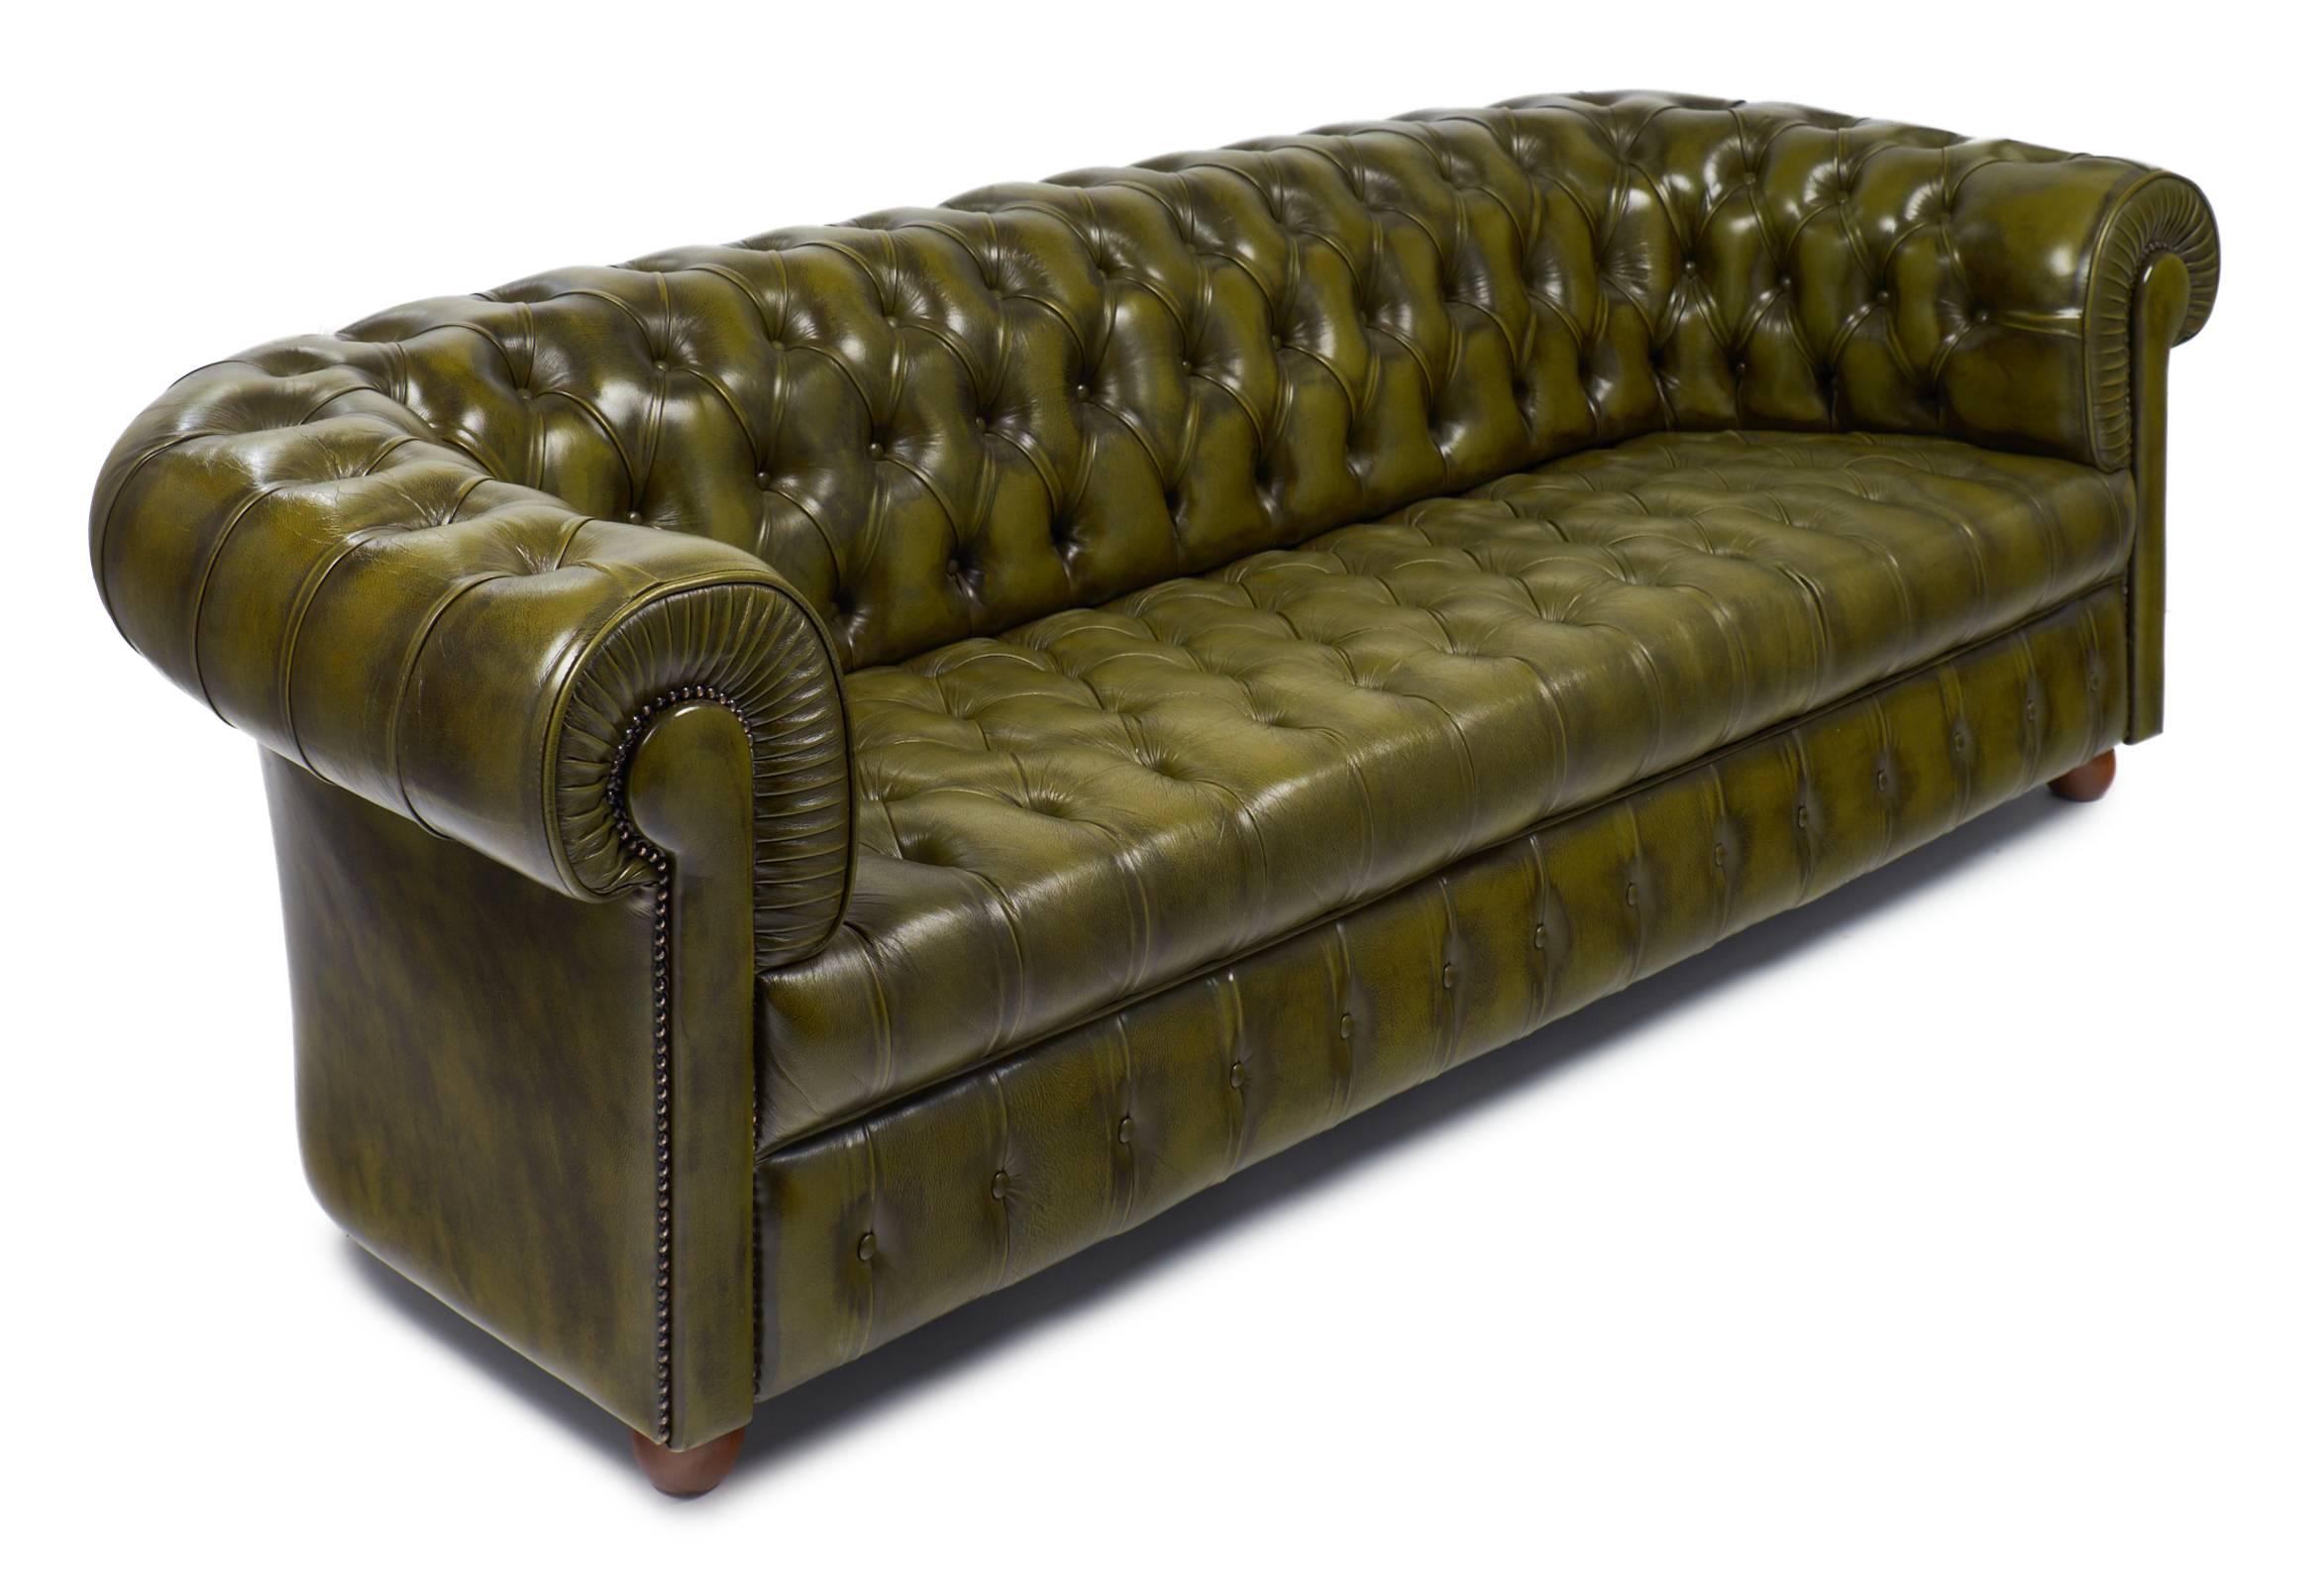 English vintage Chesterfield sofa in a beautiful green, tufted leather with brass tacks, rolled arms, and round wooden feet. This sofa is very comfortable. Ask us for information about the two matching armchairs. 